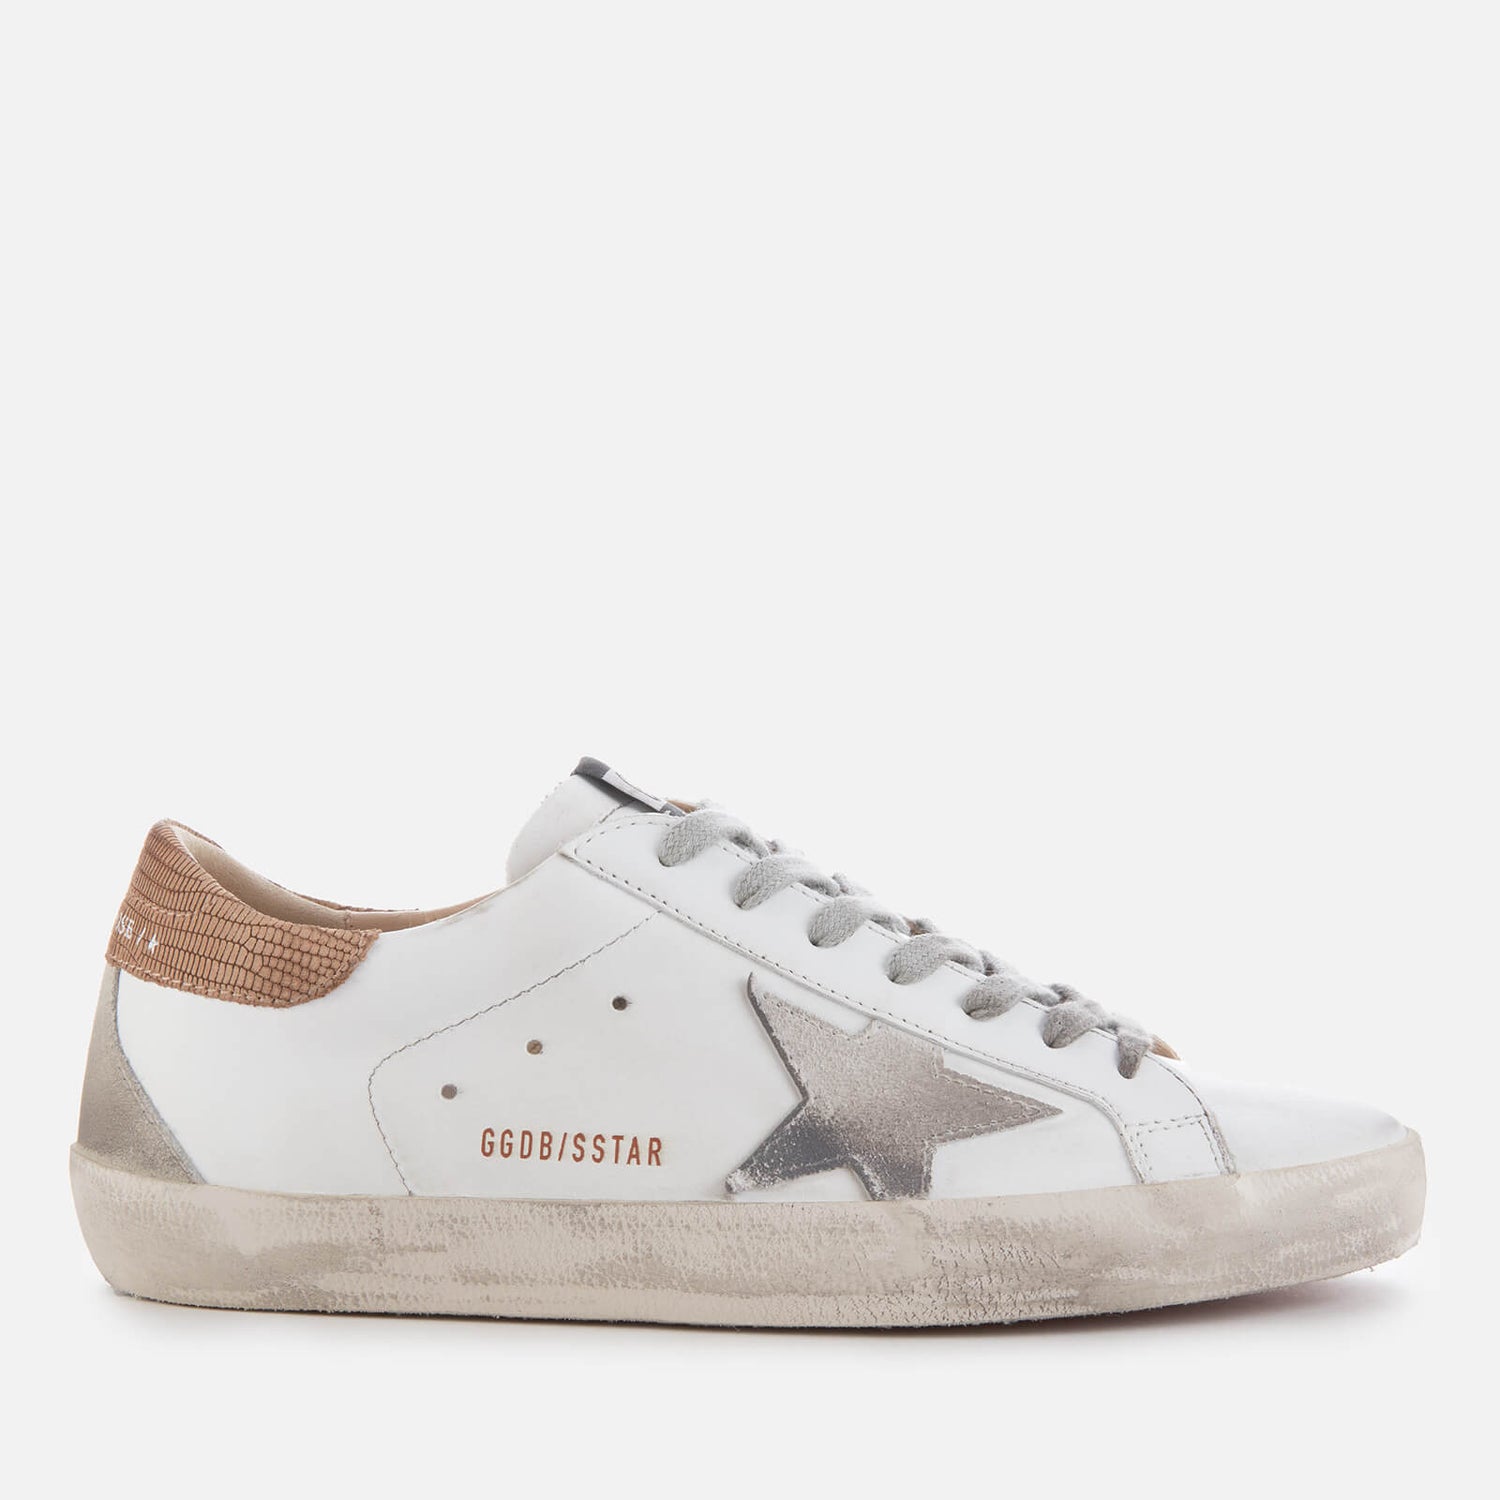 Golden Goose Deluxe Brand Men's Superstar Leather Trainers - White ...